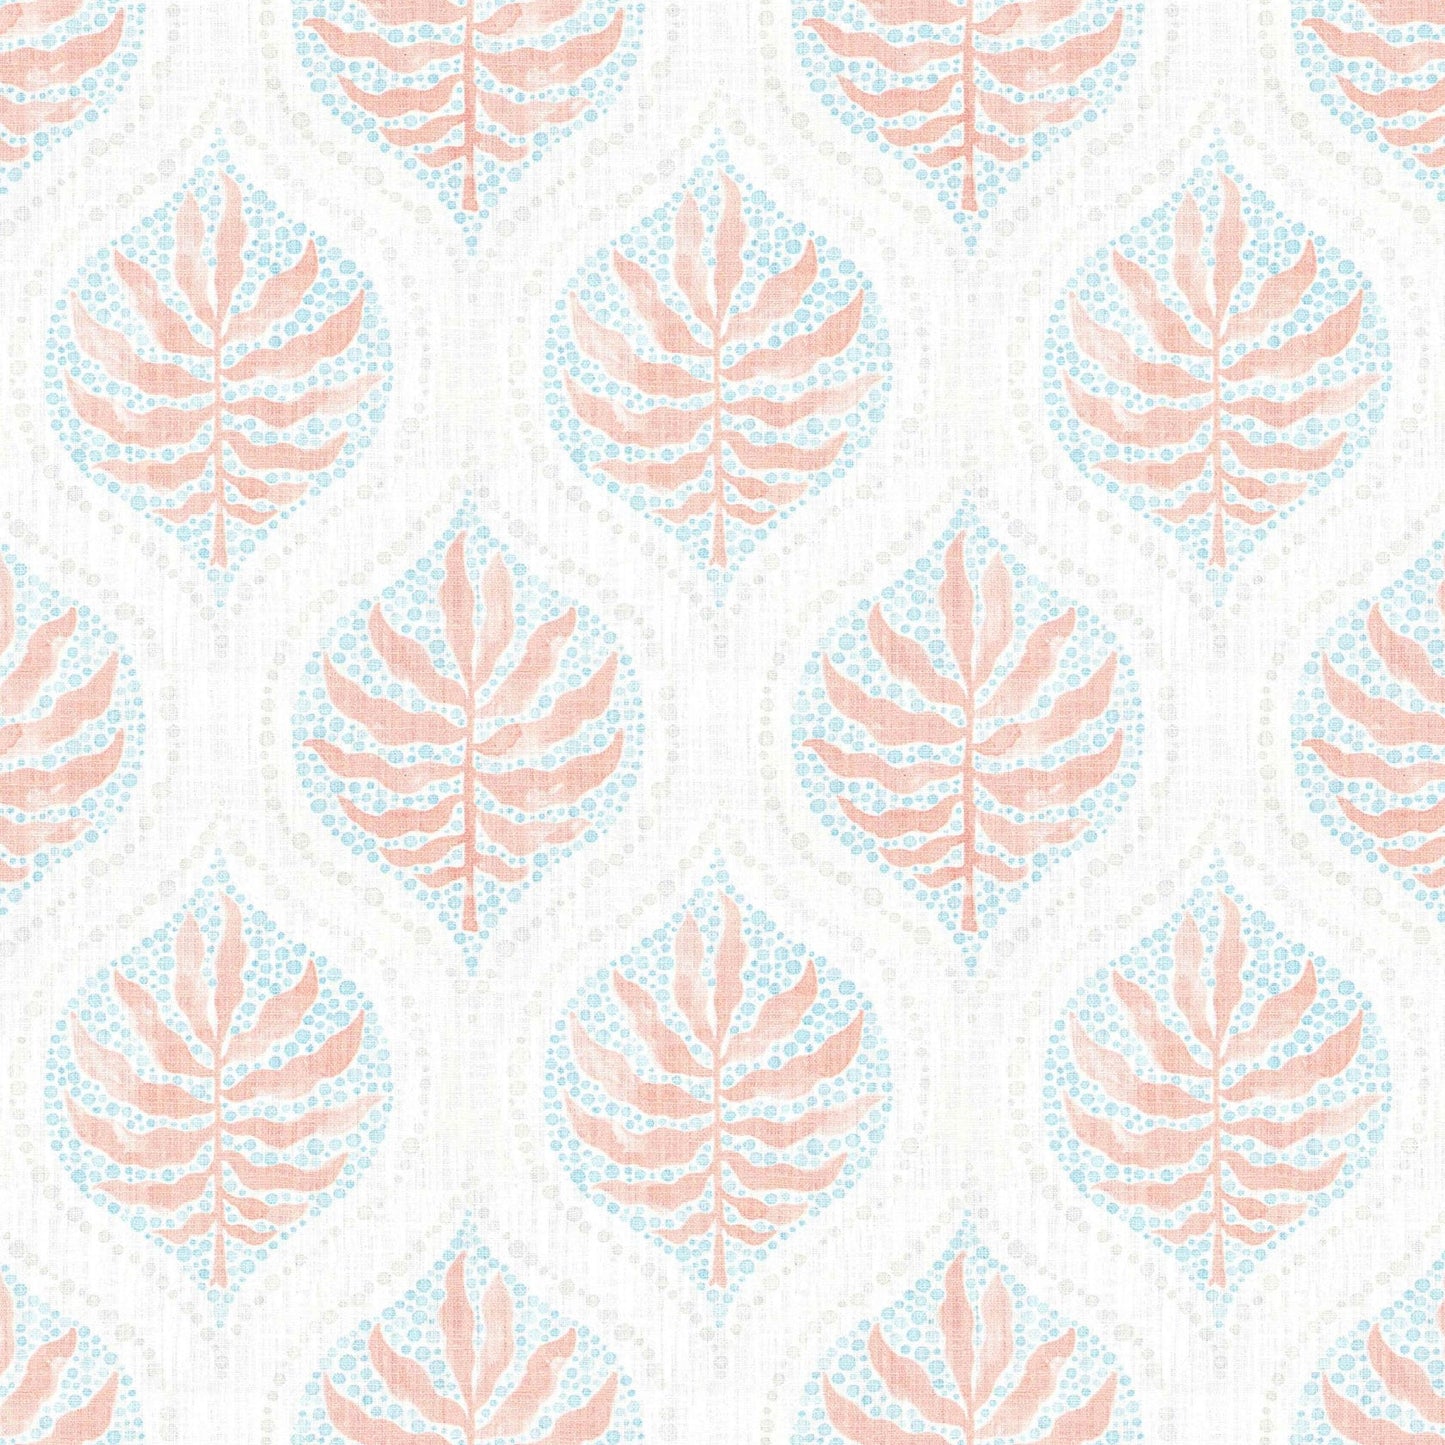 Round Tablecloth in Airlie Coral Ogee Floral Watercolor - with Blue, Gray